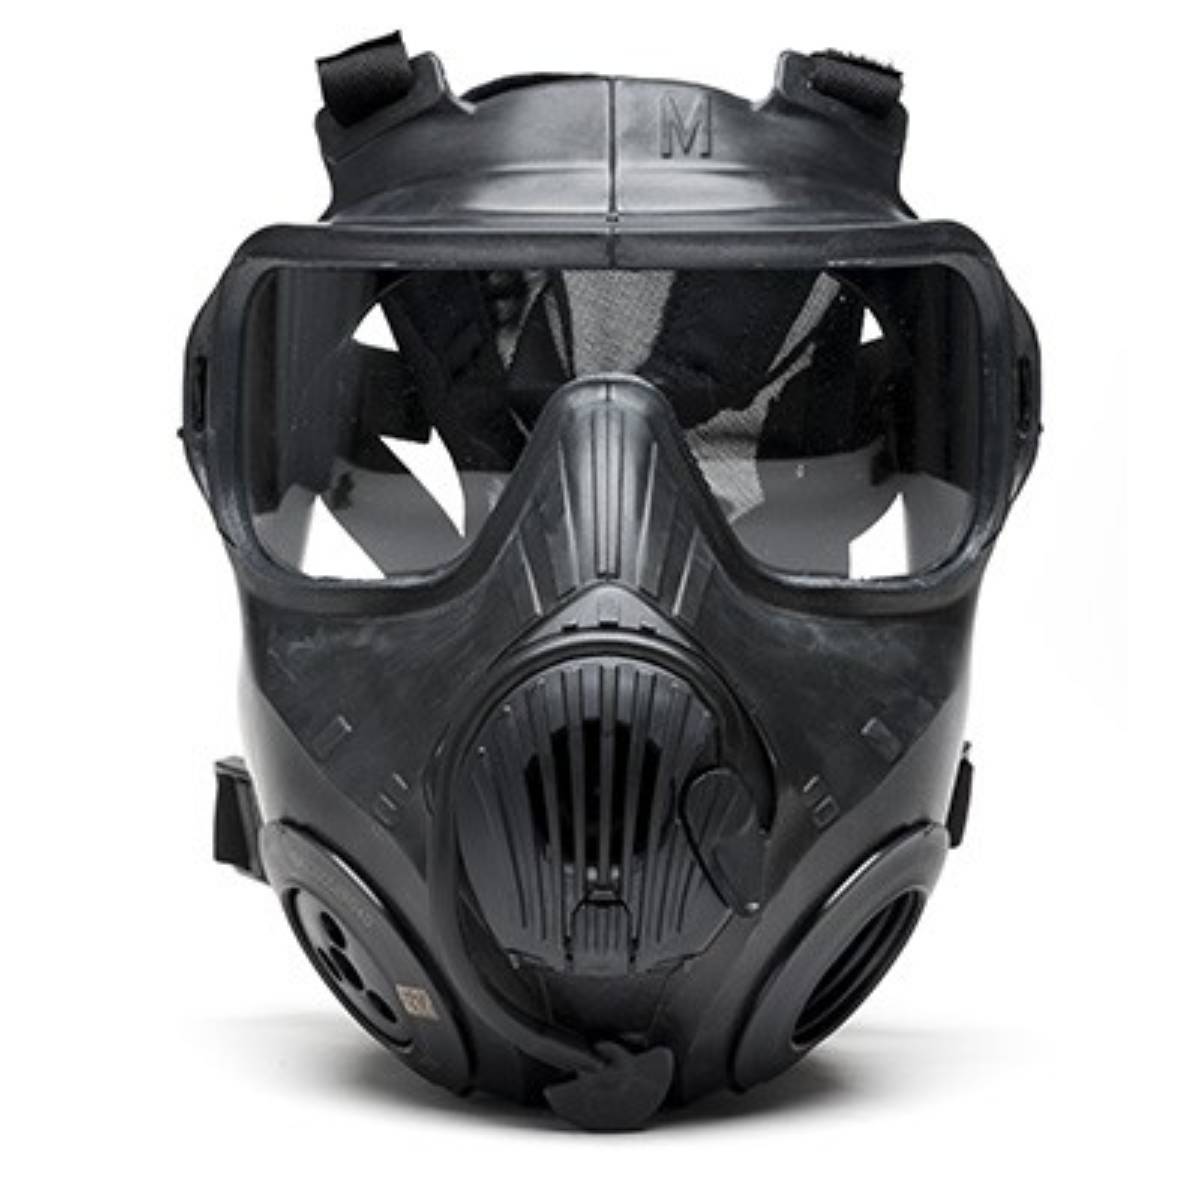 Masque complet c50 twin port - Masques complets - Vandeputte Safety Experts